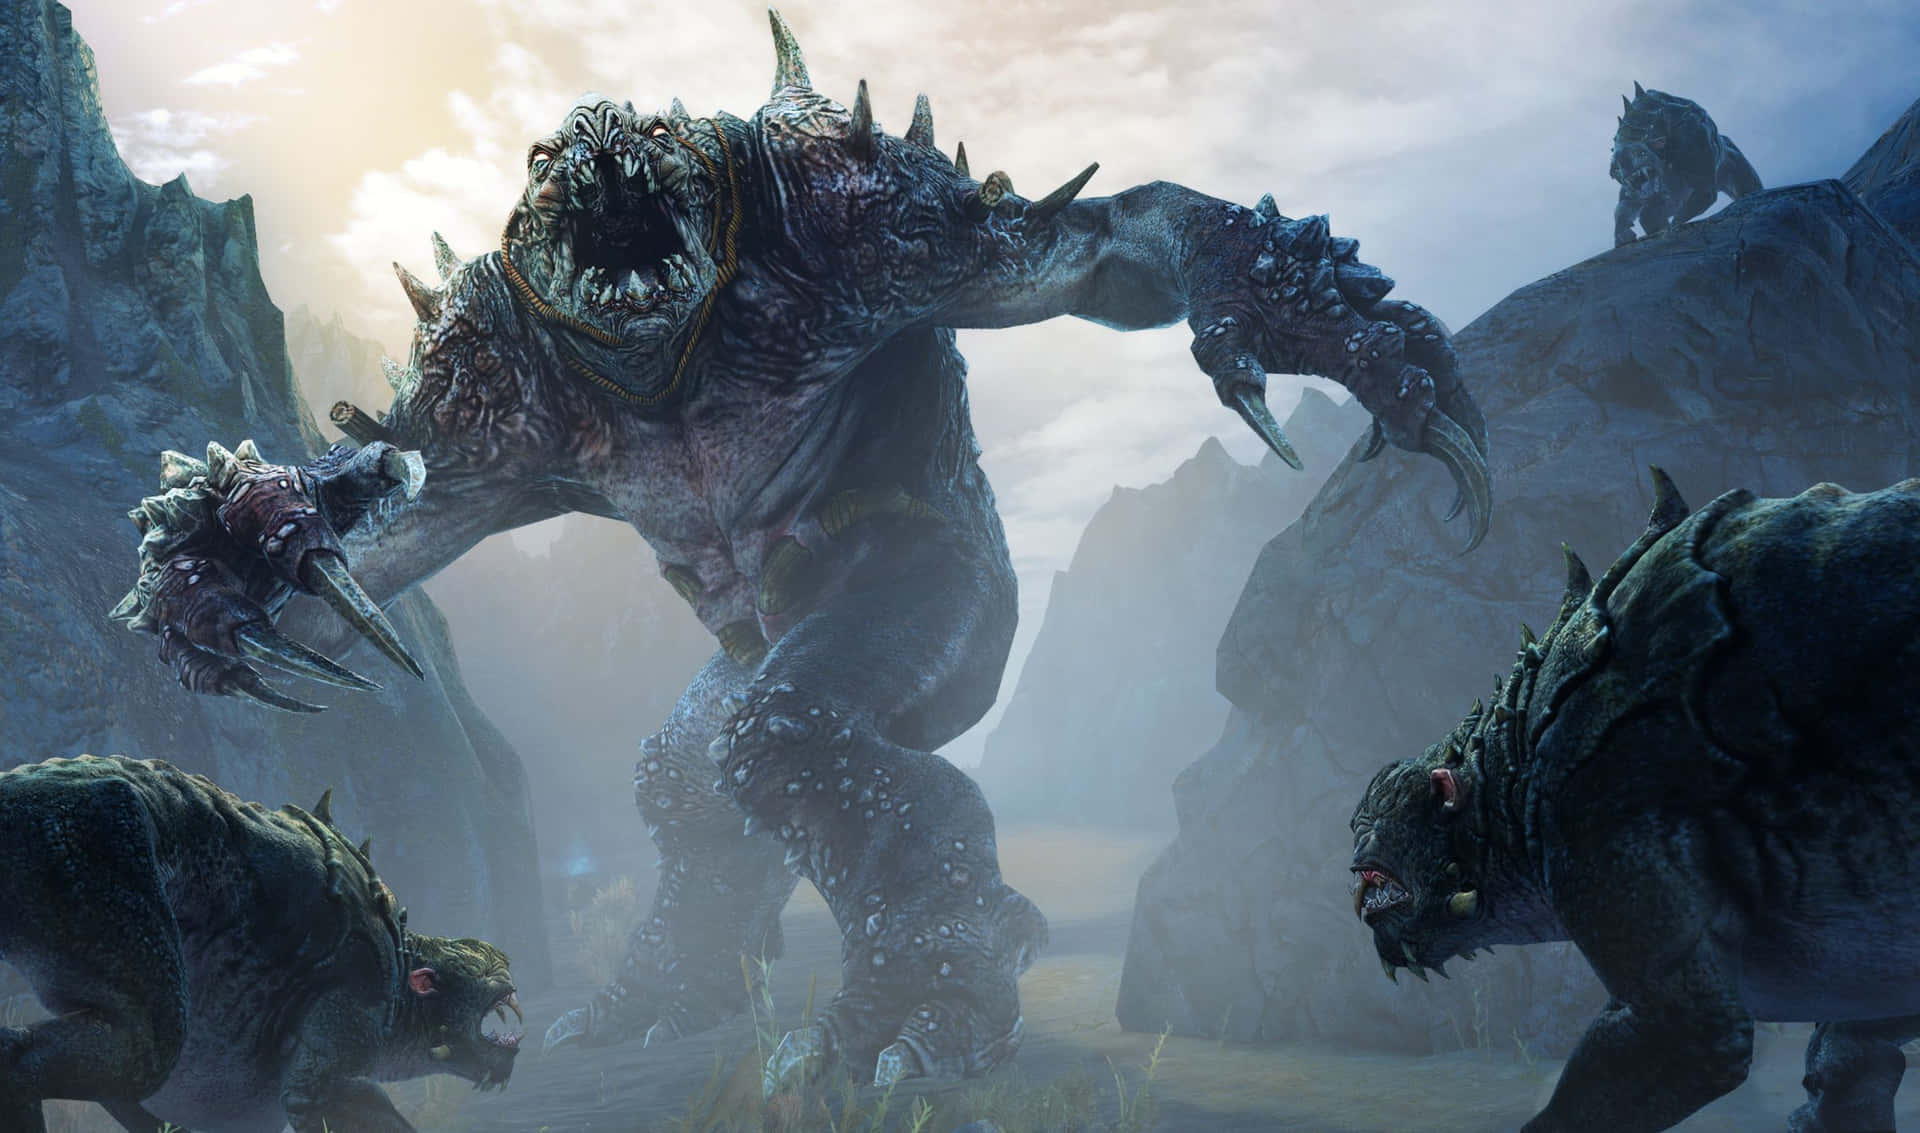 A journey of vengeance awaits in Shadow of Mordor